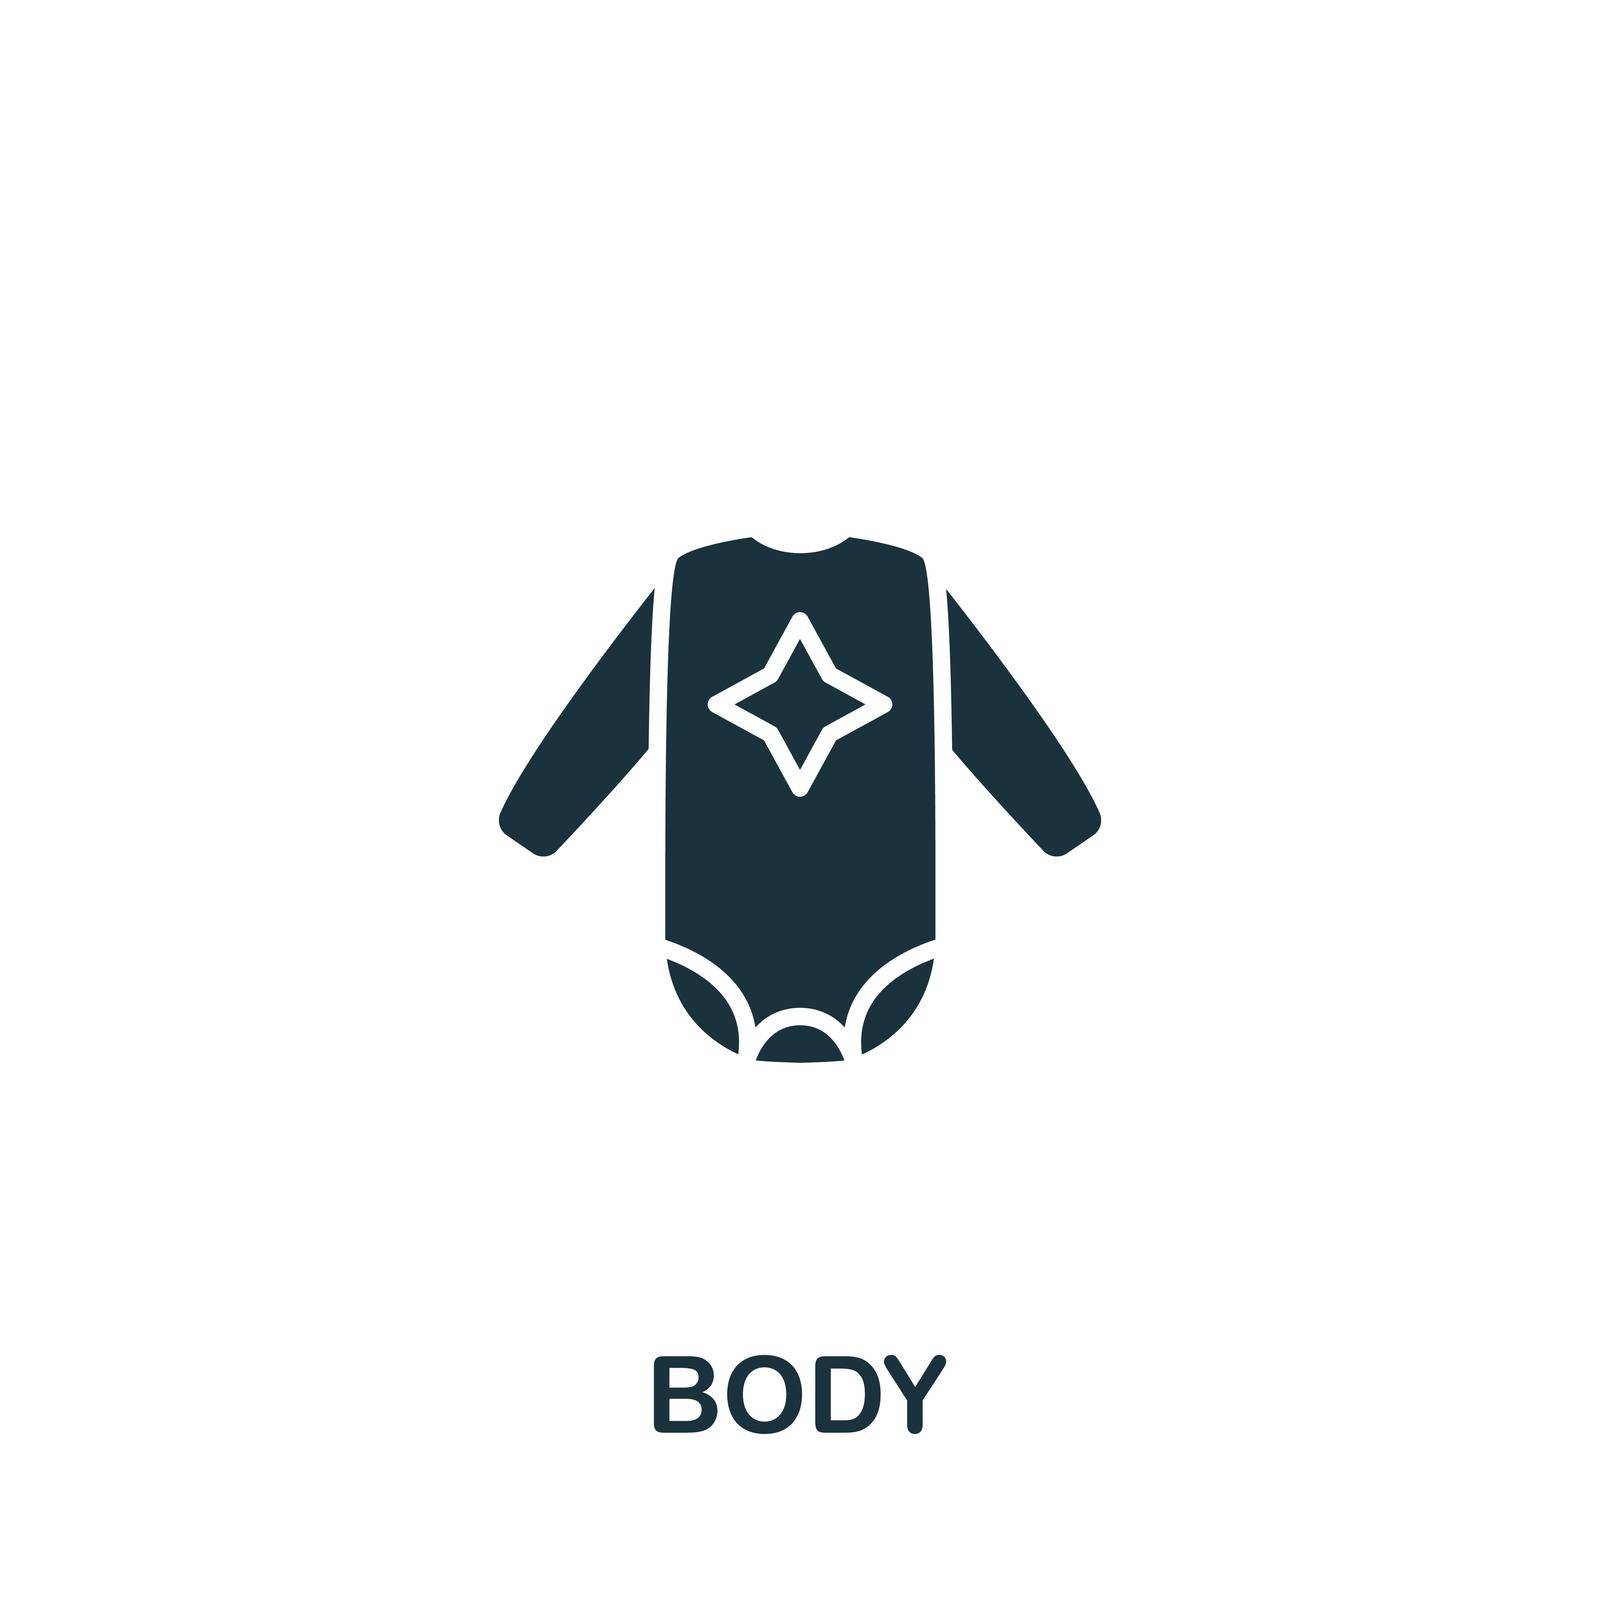 Body icon. Monochrome simple Body icon for templates, web design and infographics by simakovavector